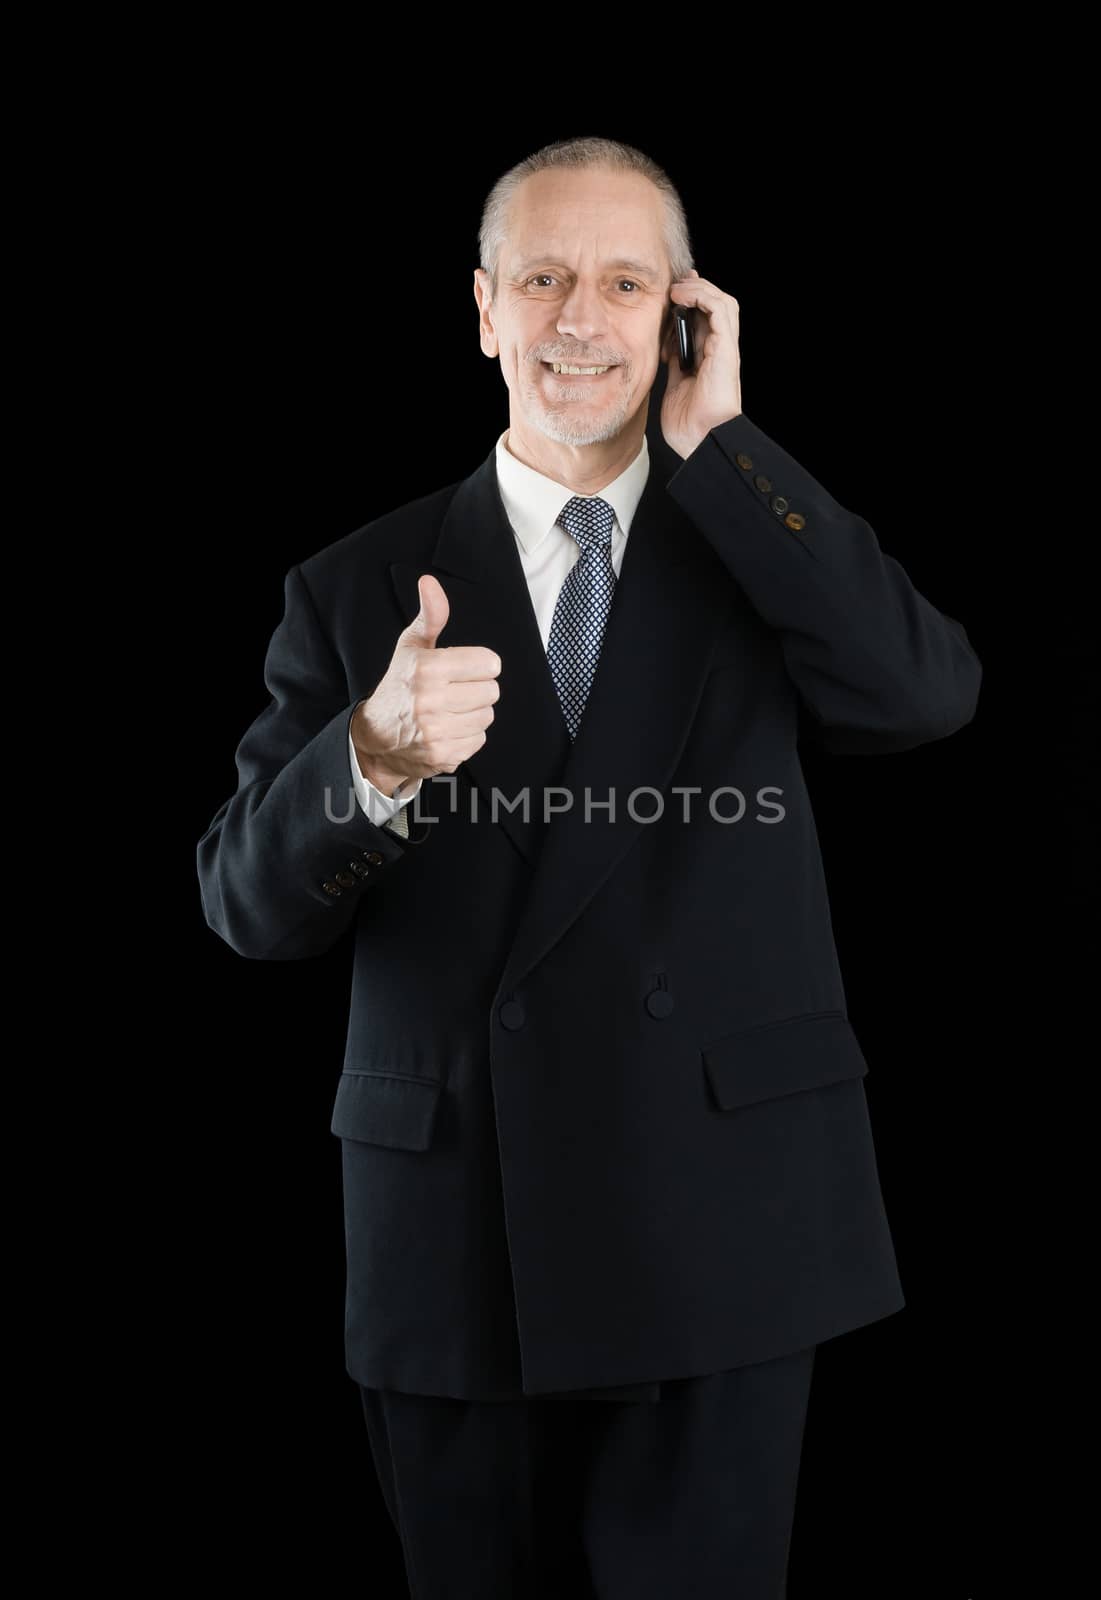 An amiable businessman wearing a black suit  smiling and speaking on mobile phone, with thumb up, on black background